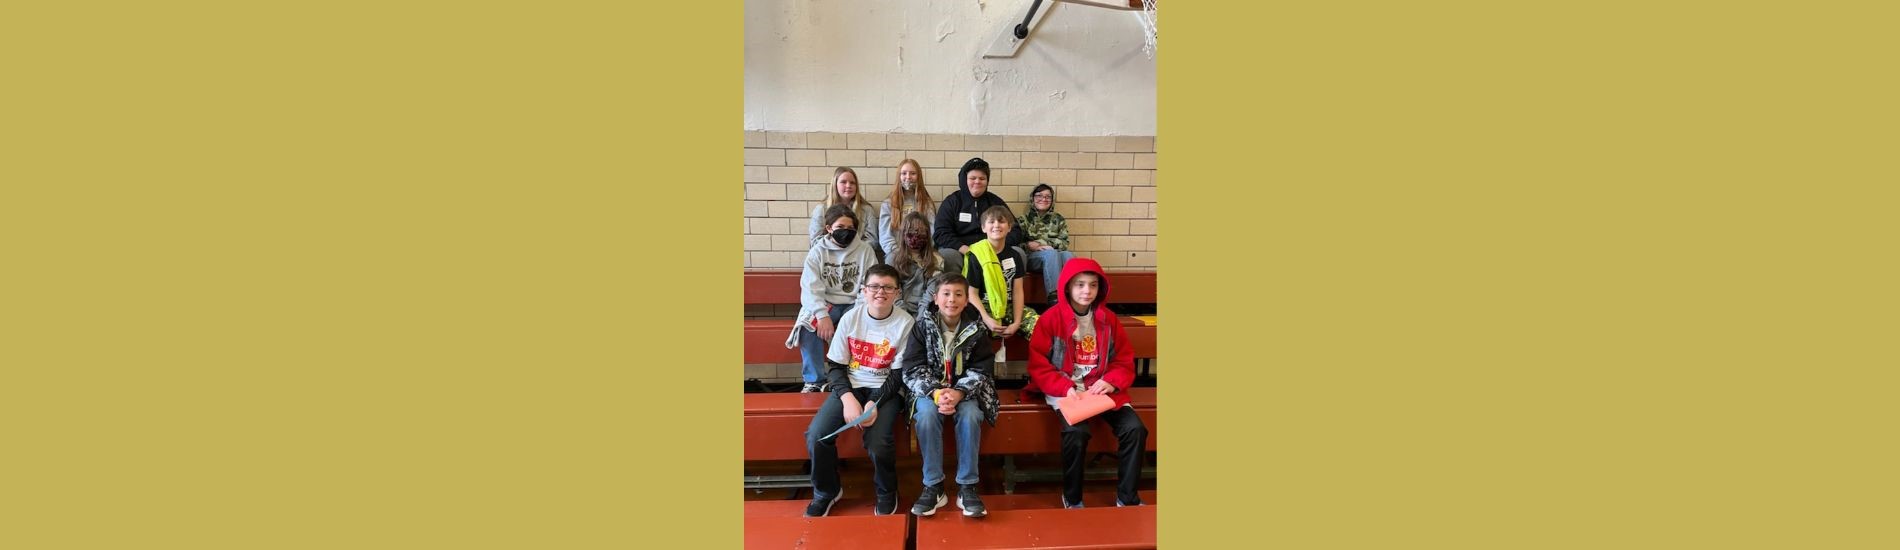 Students in 4th through 8th grade who represented Windham at Math 24 tournament on February 11th